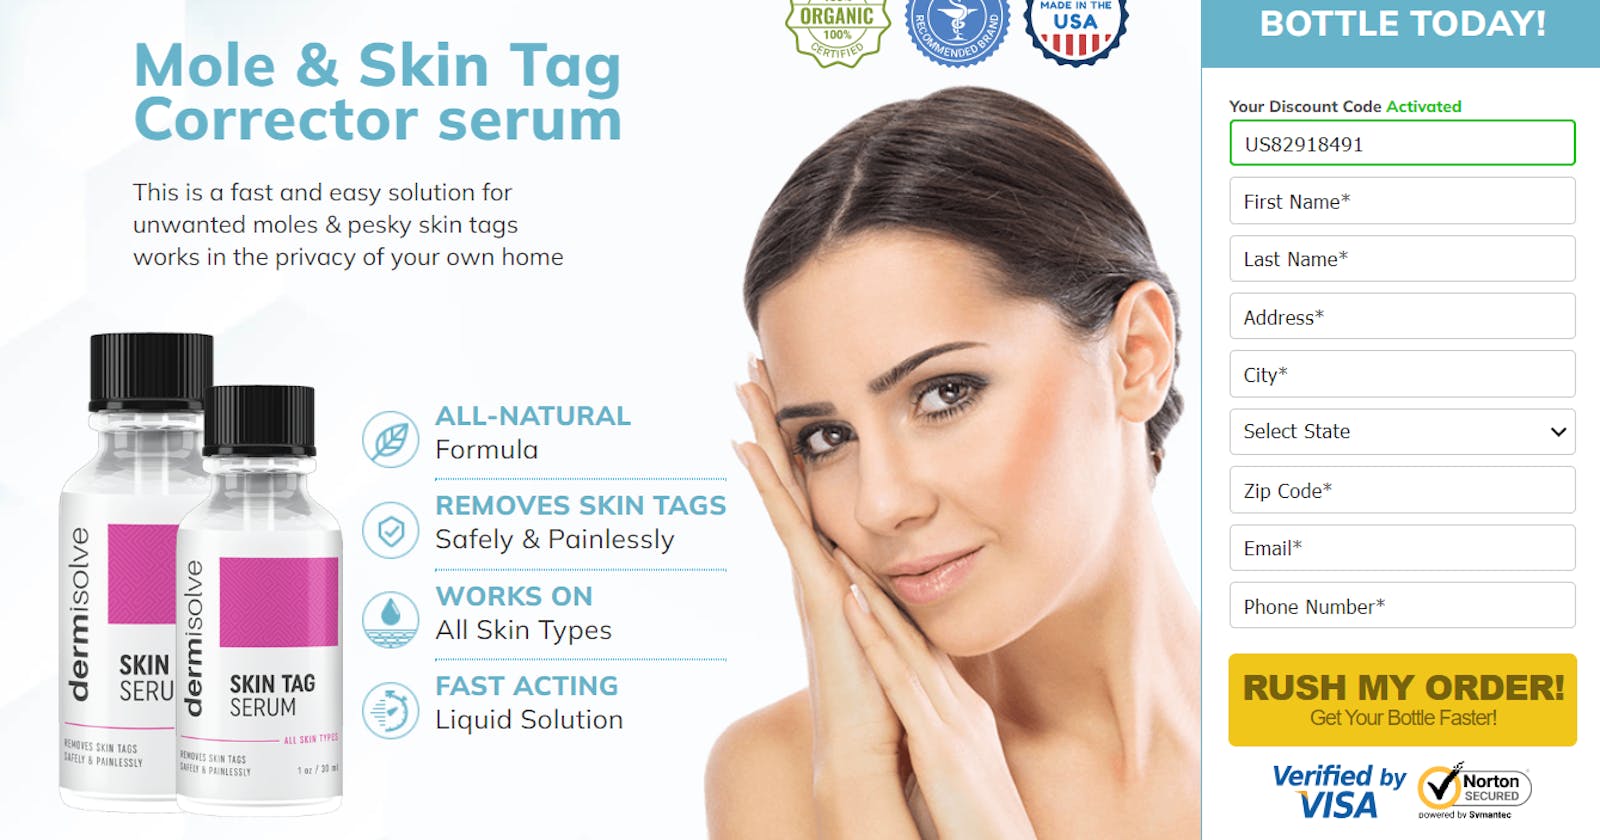 Dermisolve Skin Tag Remover: Your Solution for Unwanted Skin Tags!